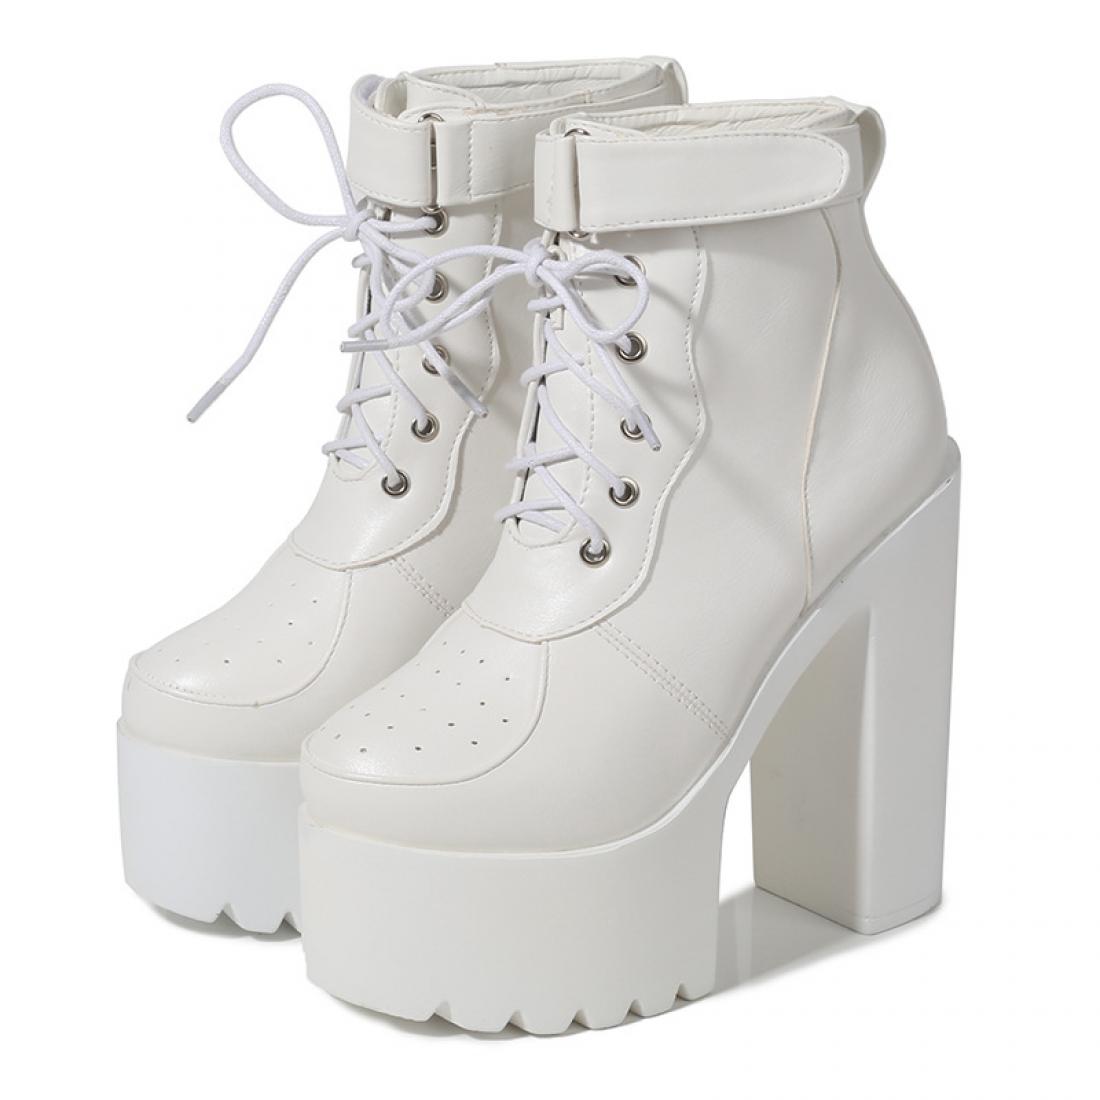 White Sneakers Chunky Block Sole High Heels Boots Shoes ...